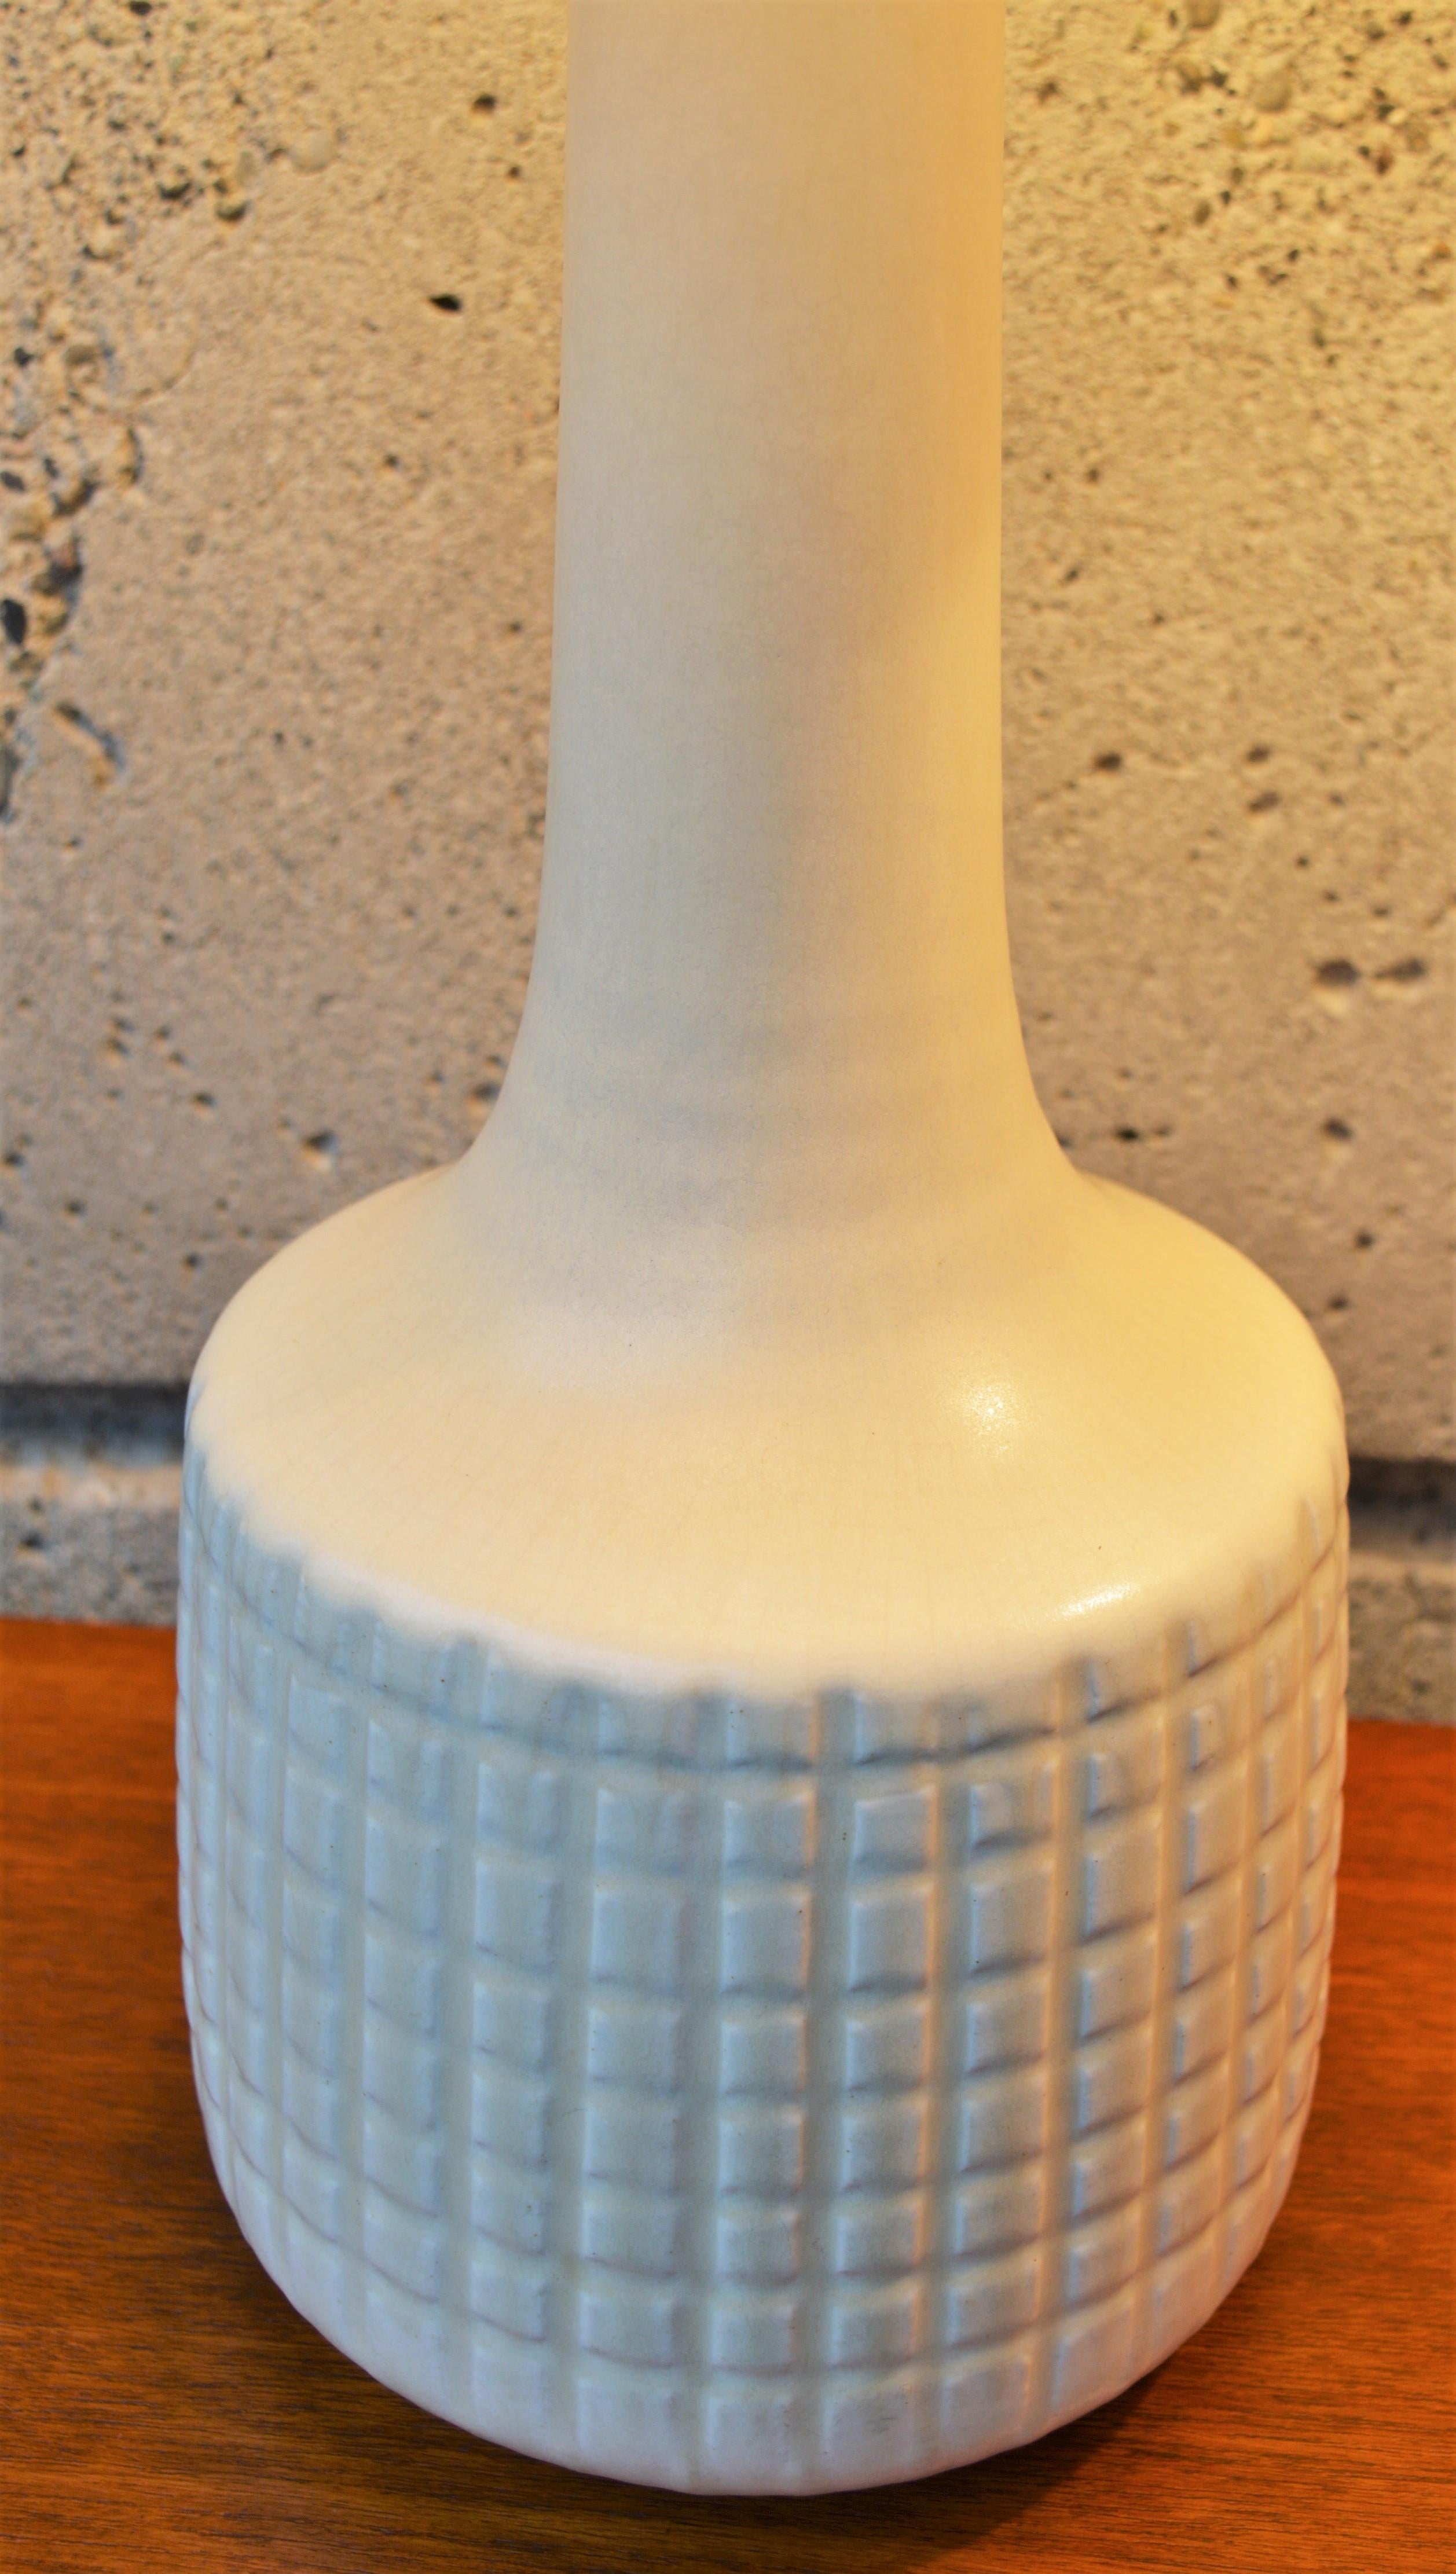 Incised Cream Ceramic Lotte & Gunnar Bostlund Lamps with Fiberglass Shades, Pair In Good Condition For Sale In New Westminster, British Columbia